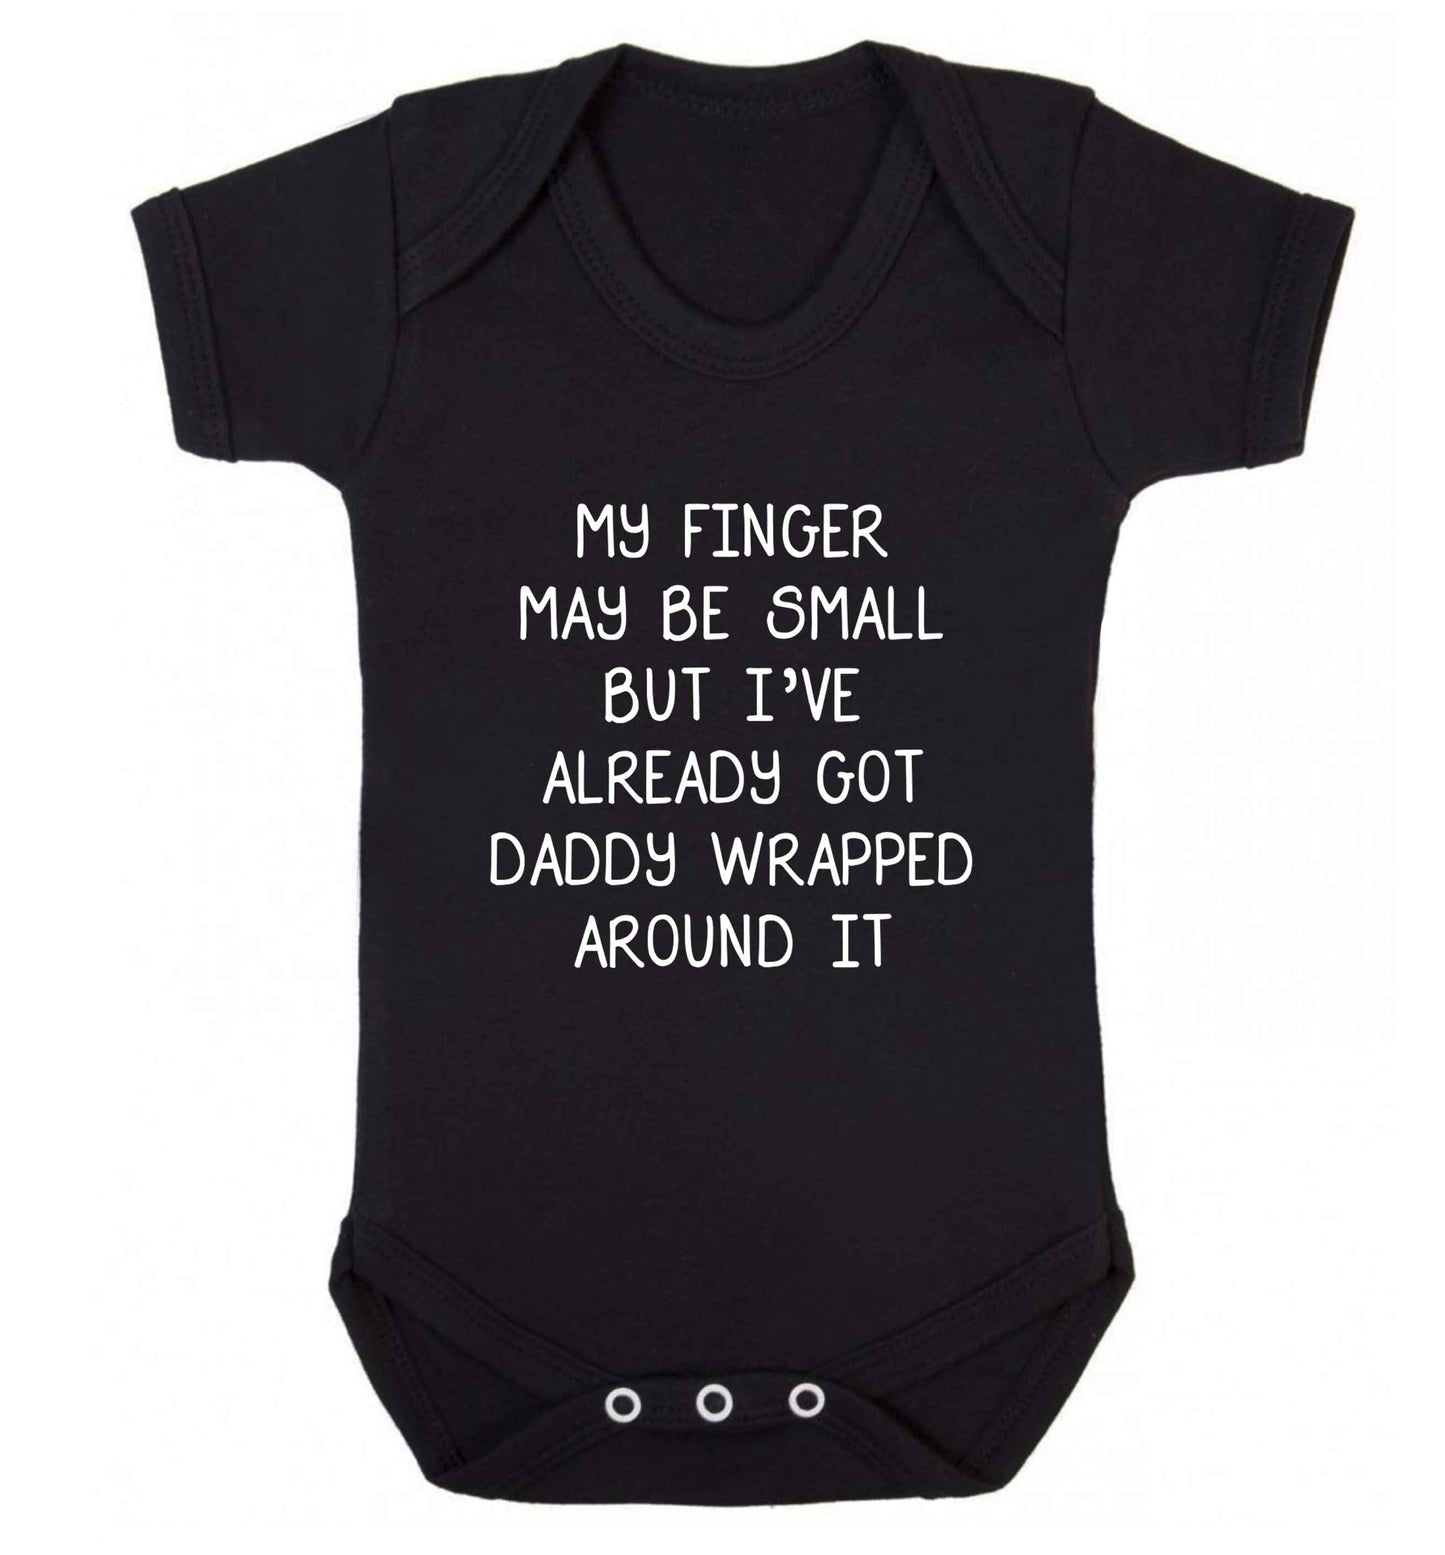 My finger may be small but I've already got daddy wrapped around it baby vest black 18-24 months